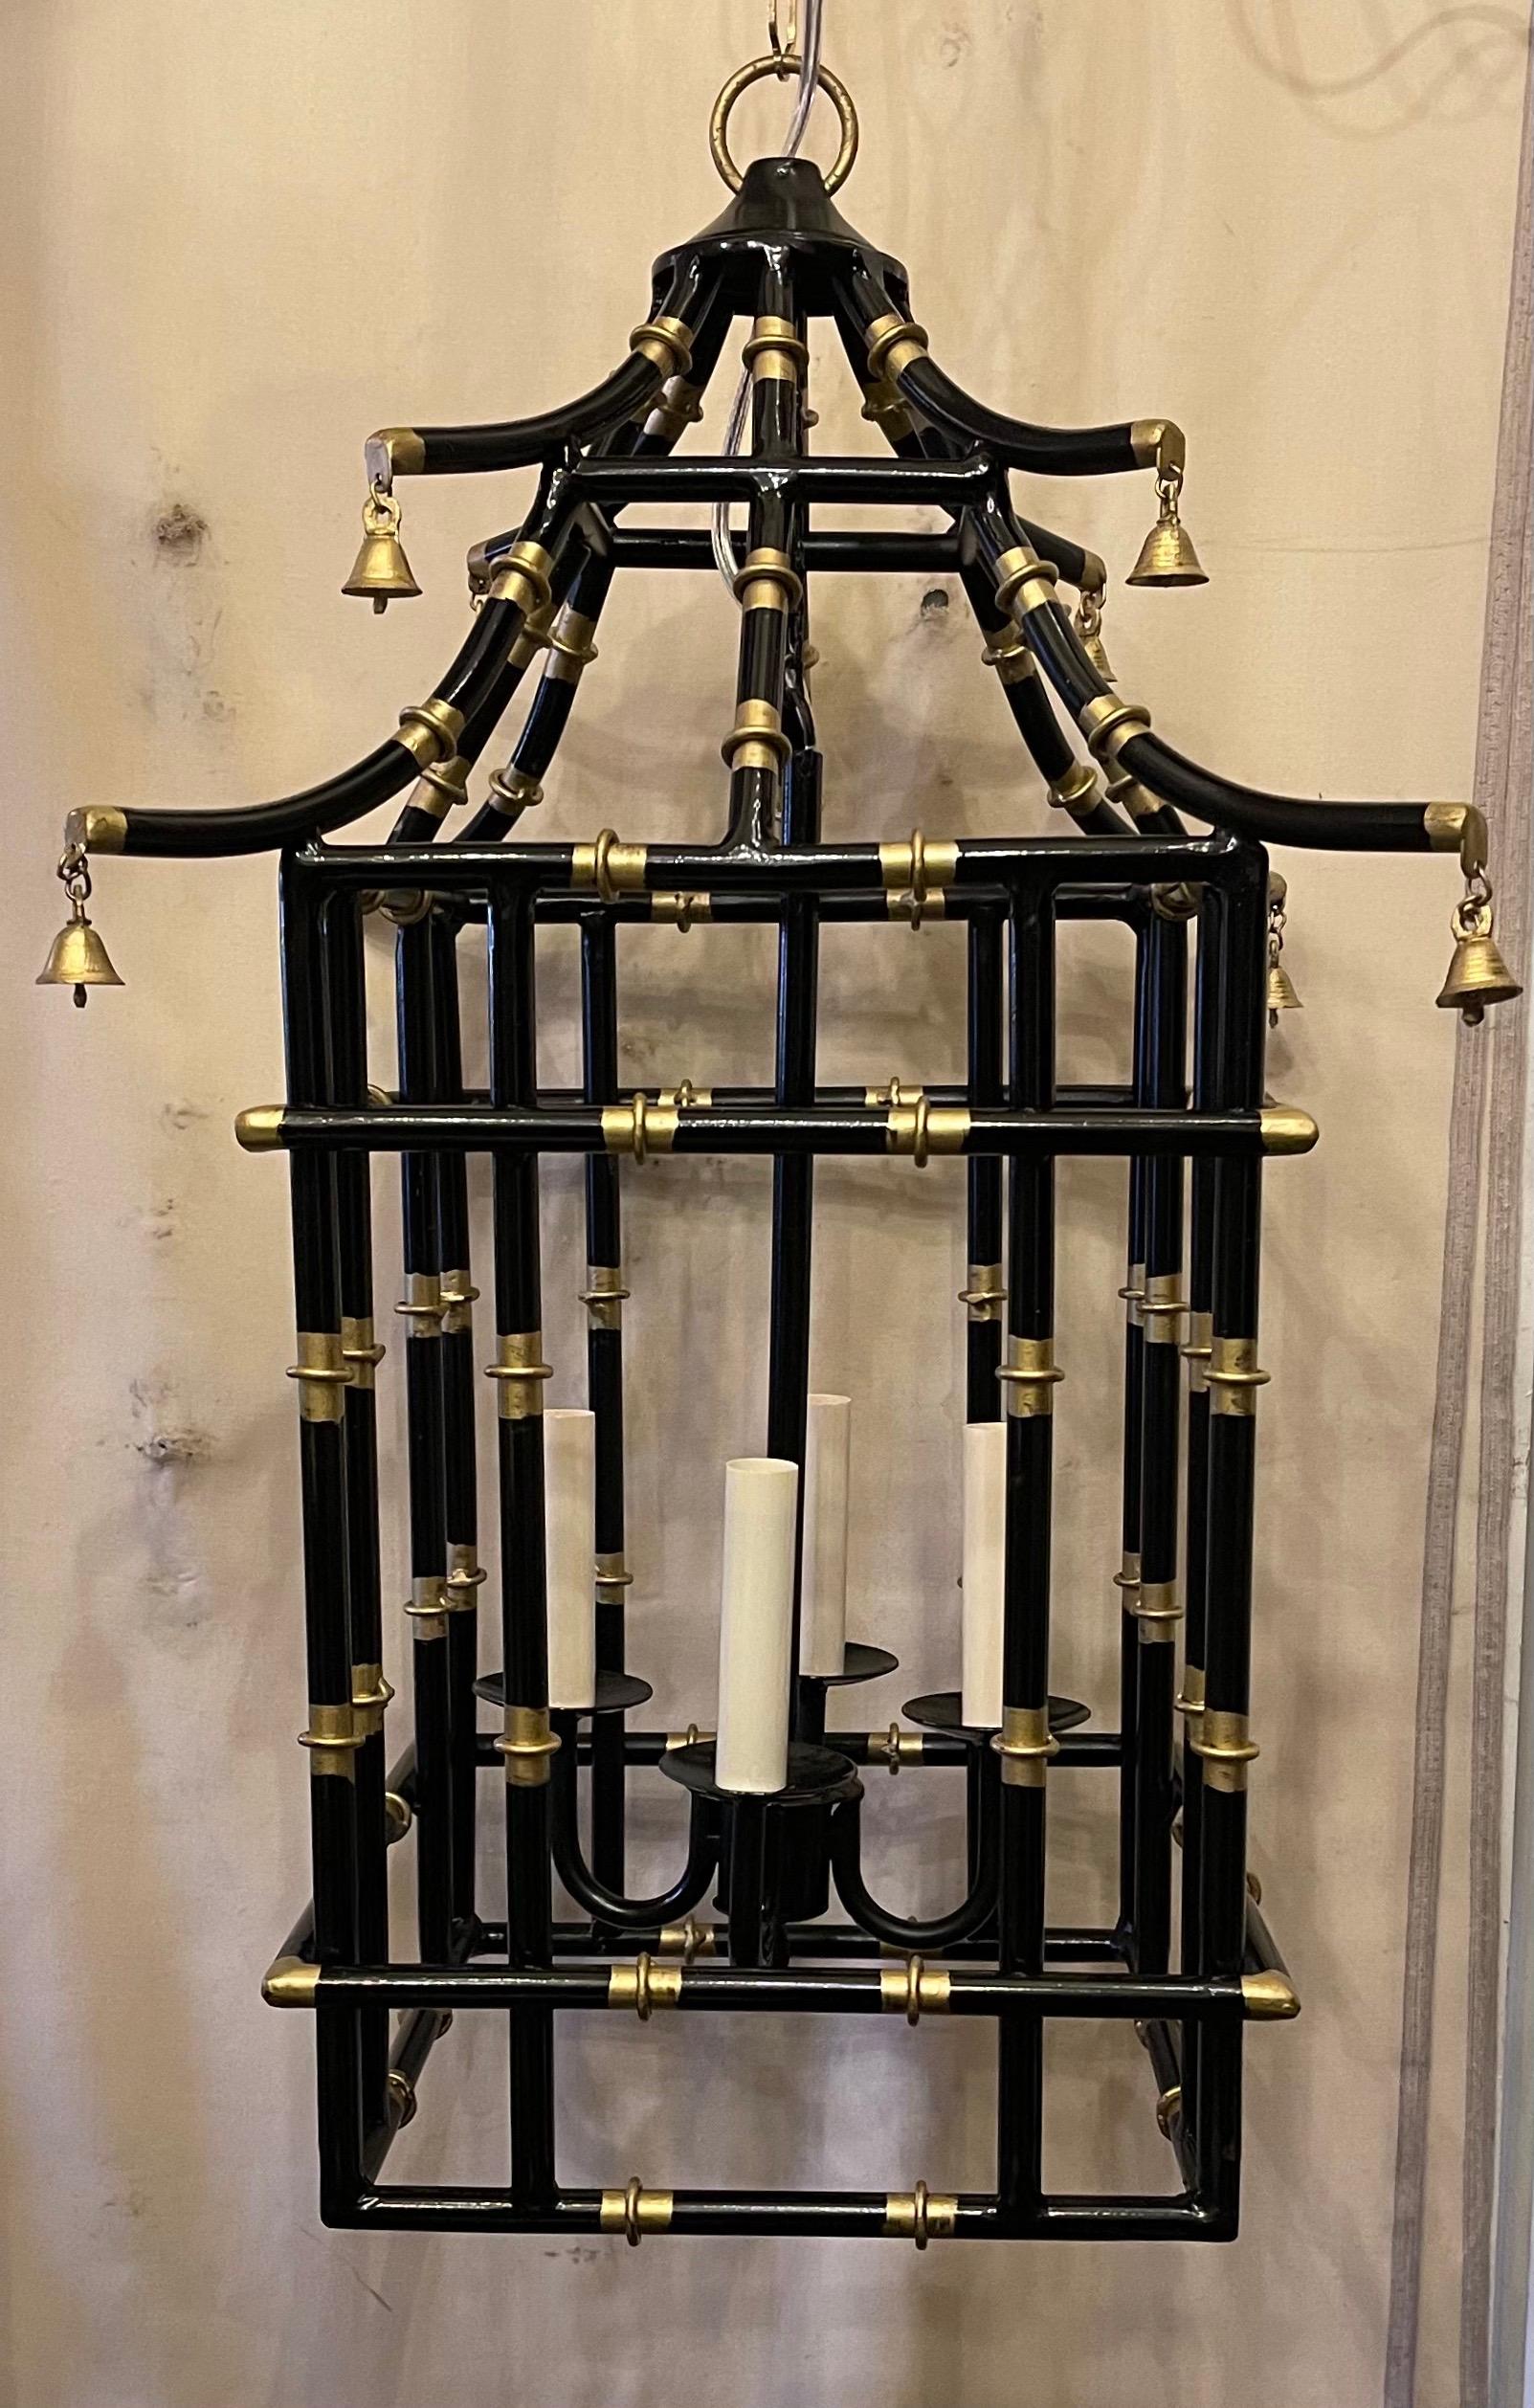 A wonderful medium sized black & gold gilt pagoda bamboo form chinoiserie lantern fixture with 4 candelabra light cluster.
Rewired and ready to install with chain canopy and mounting hardware.

